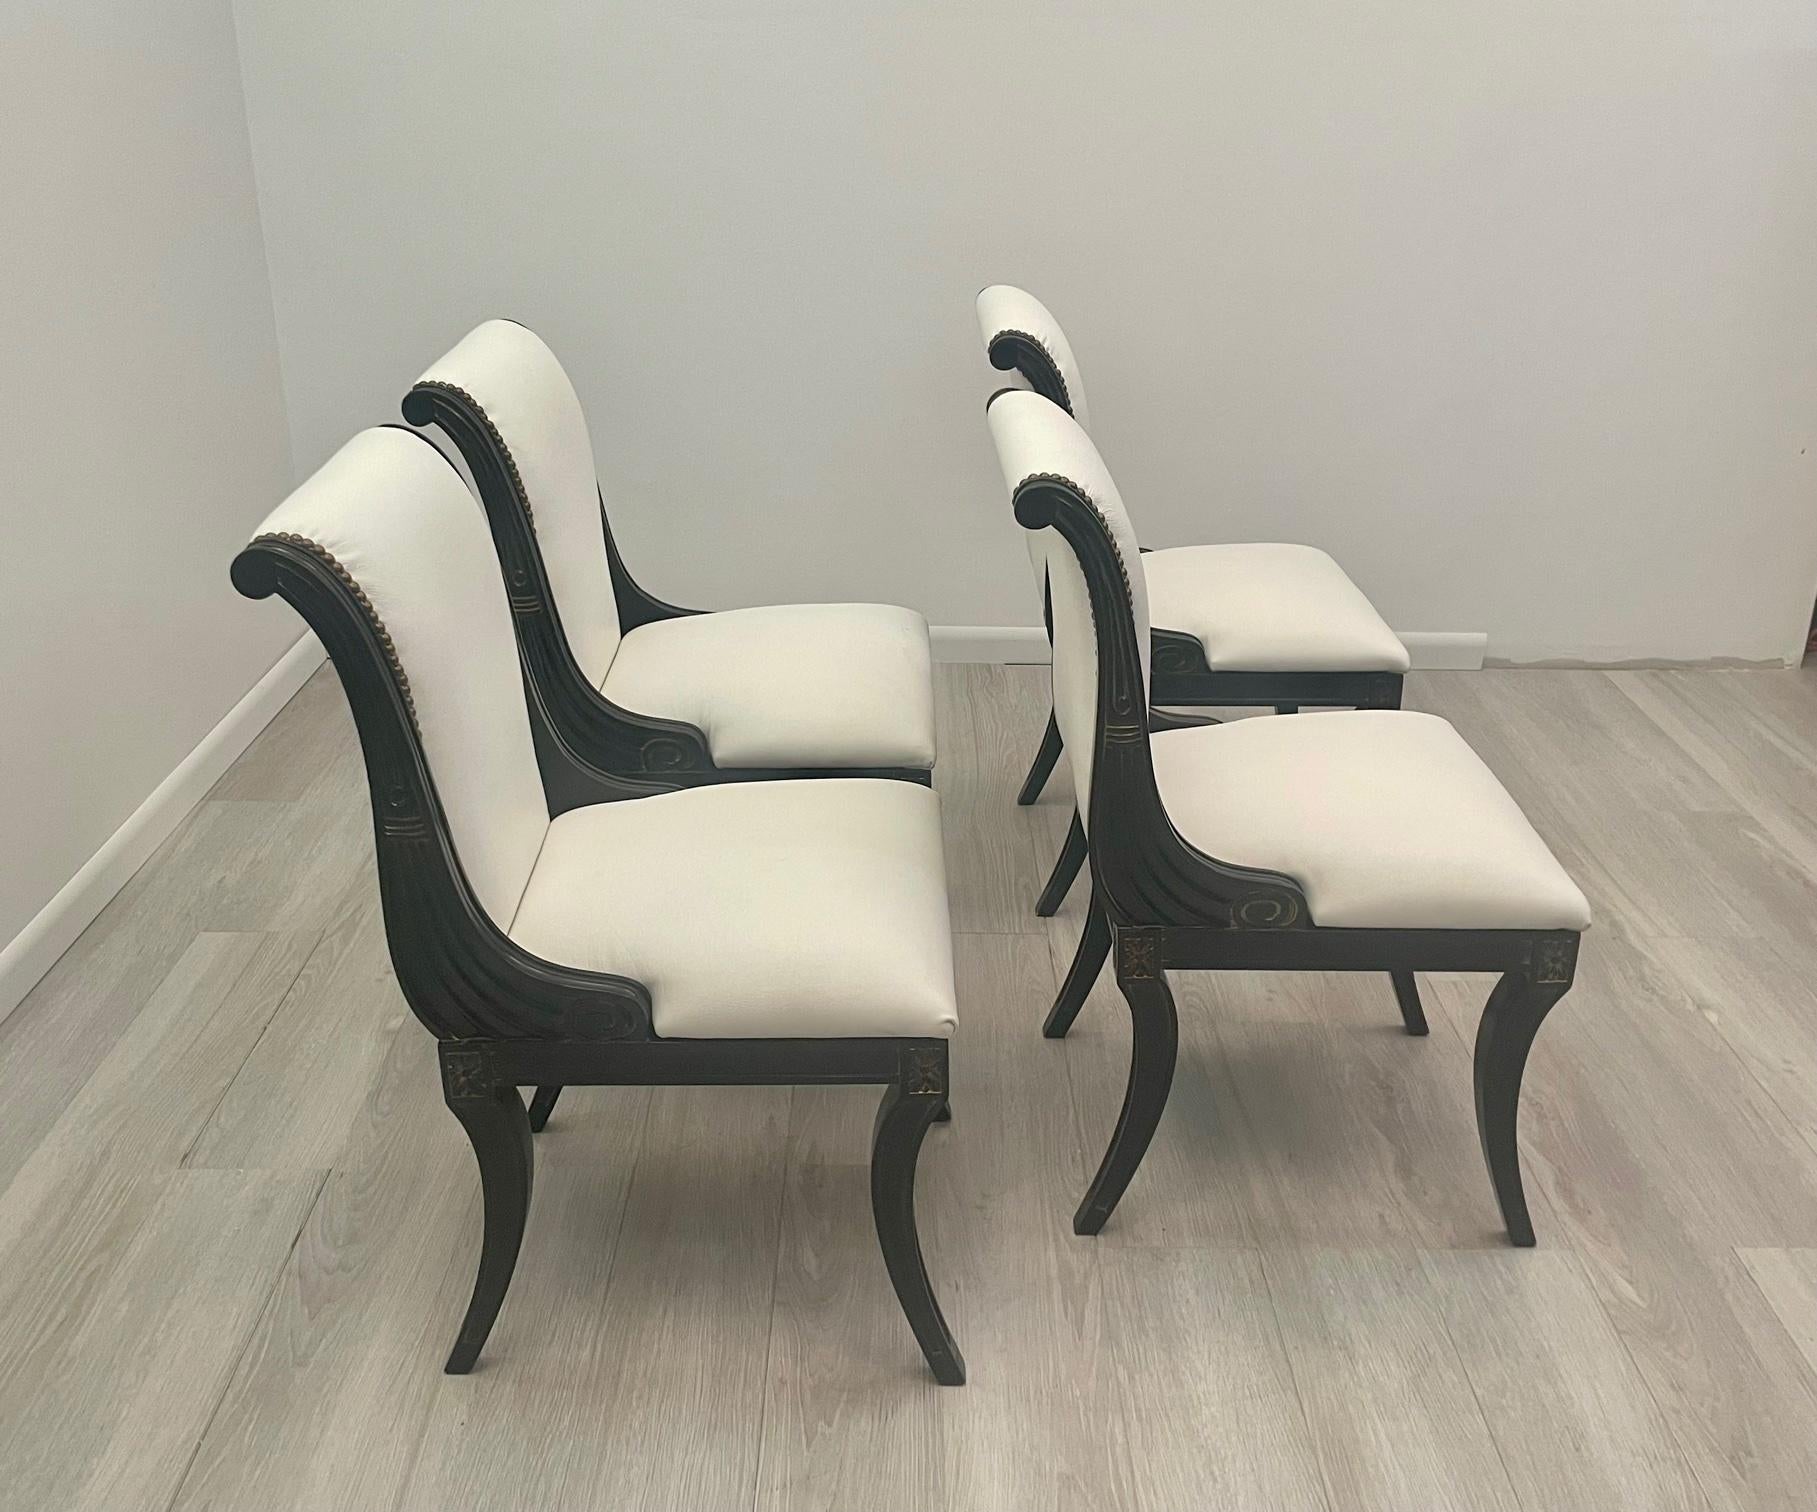 Glamorous set of 4 ebonized wood Hollywood Regency side dining chairs upholstered in white leather and finished with brass nailheads. There are slight gilt highlights in the wood patina.
Measure: Seat height 18.